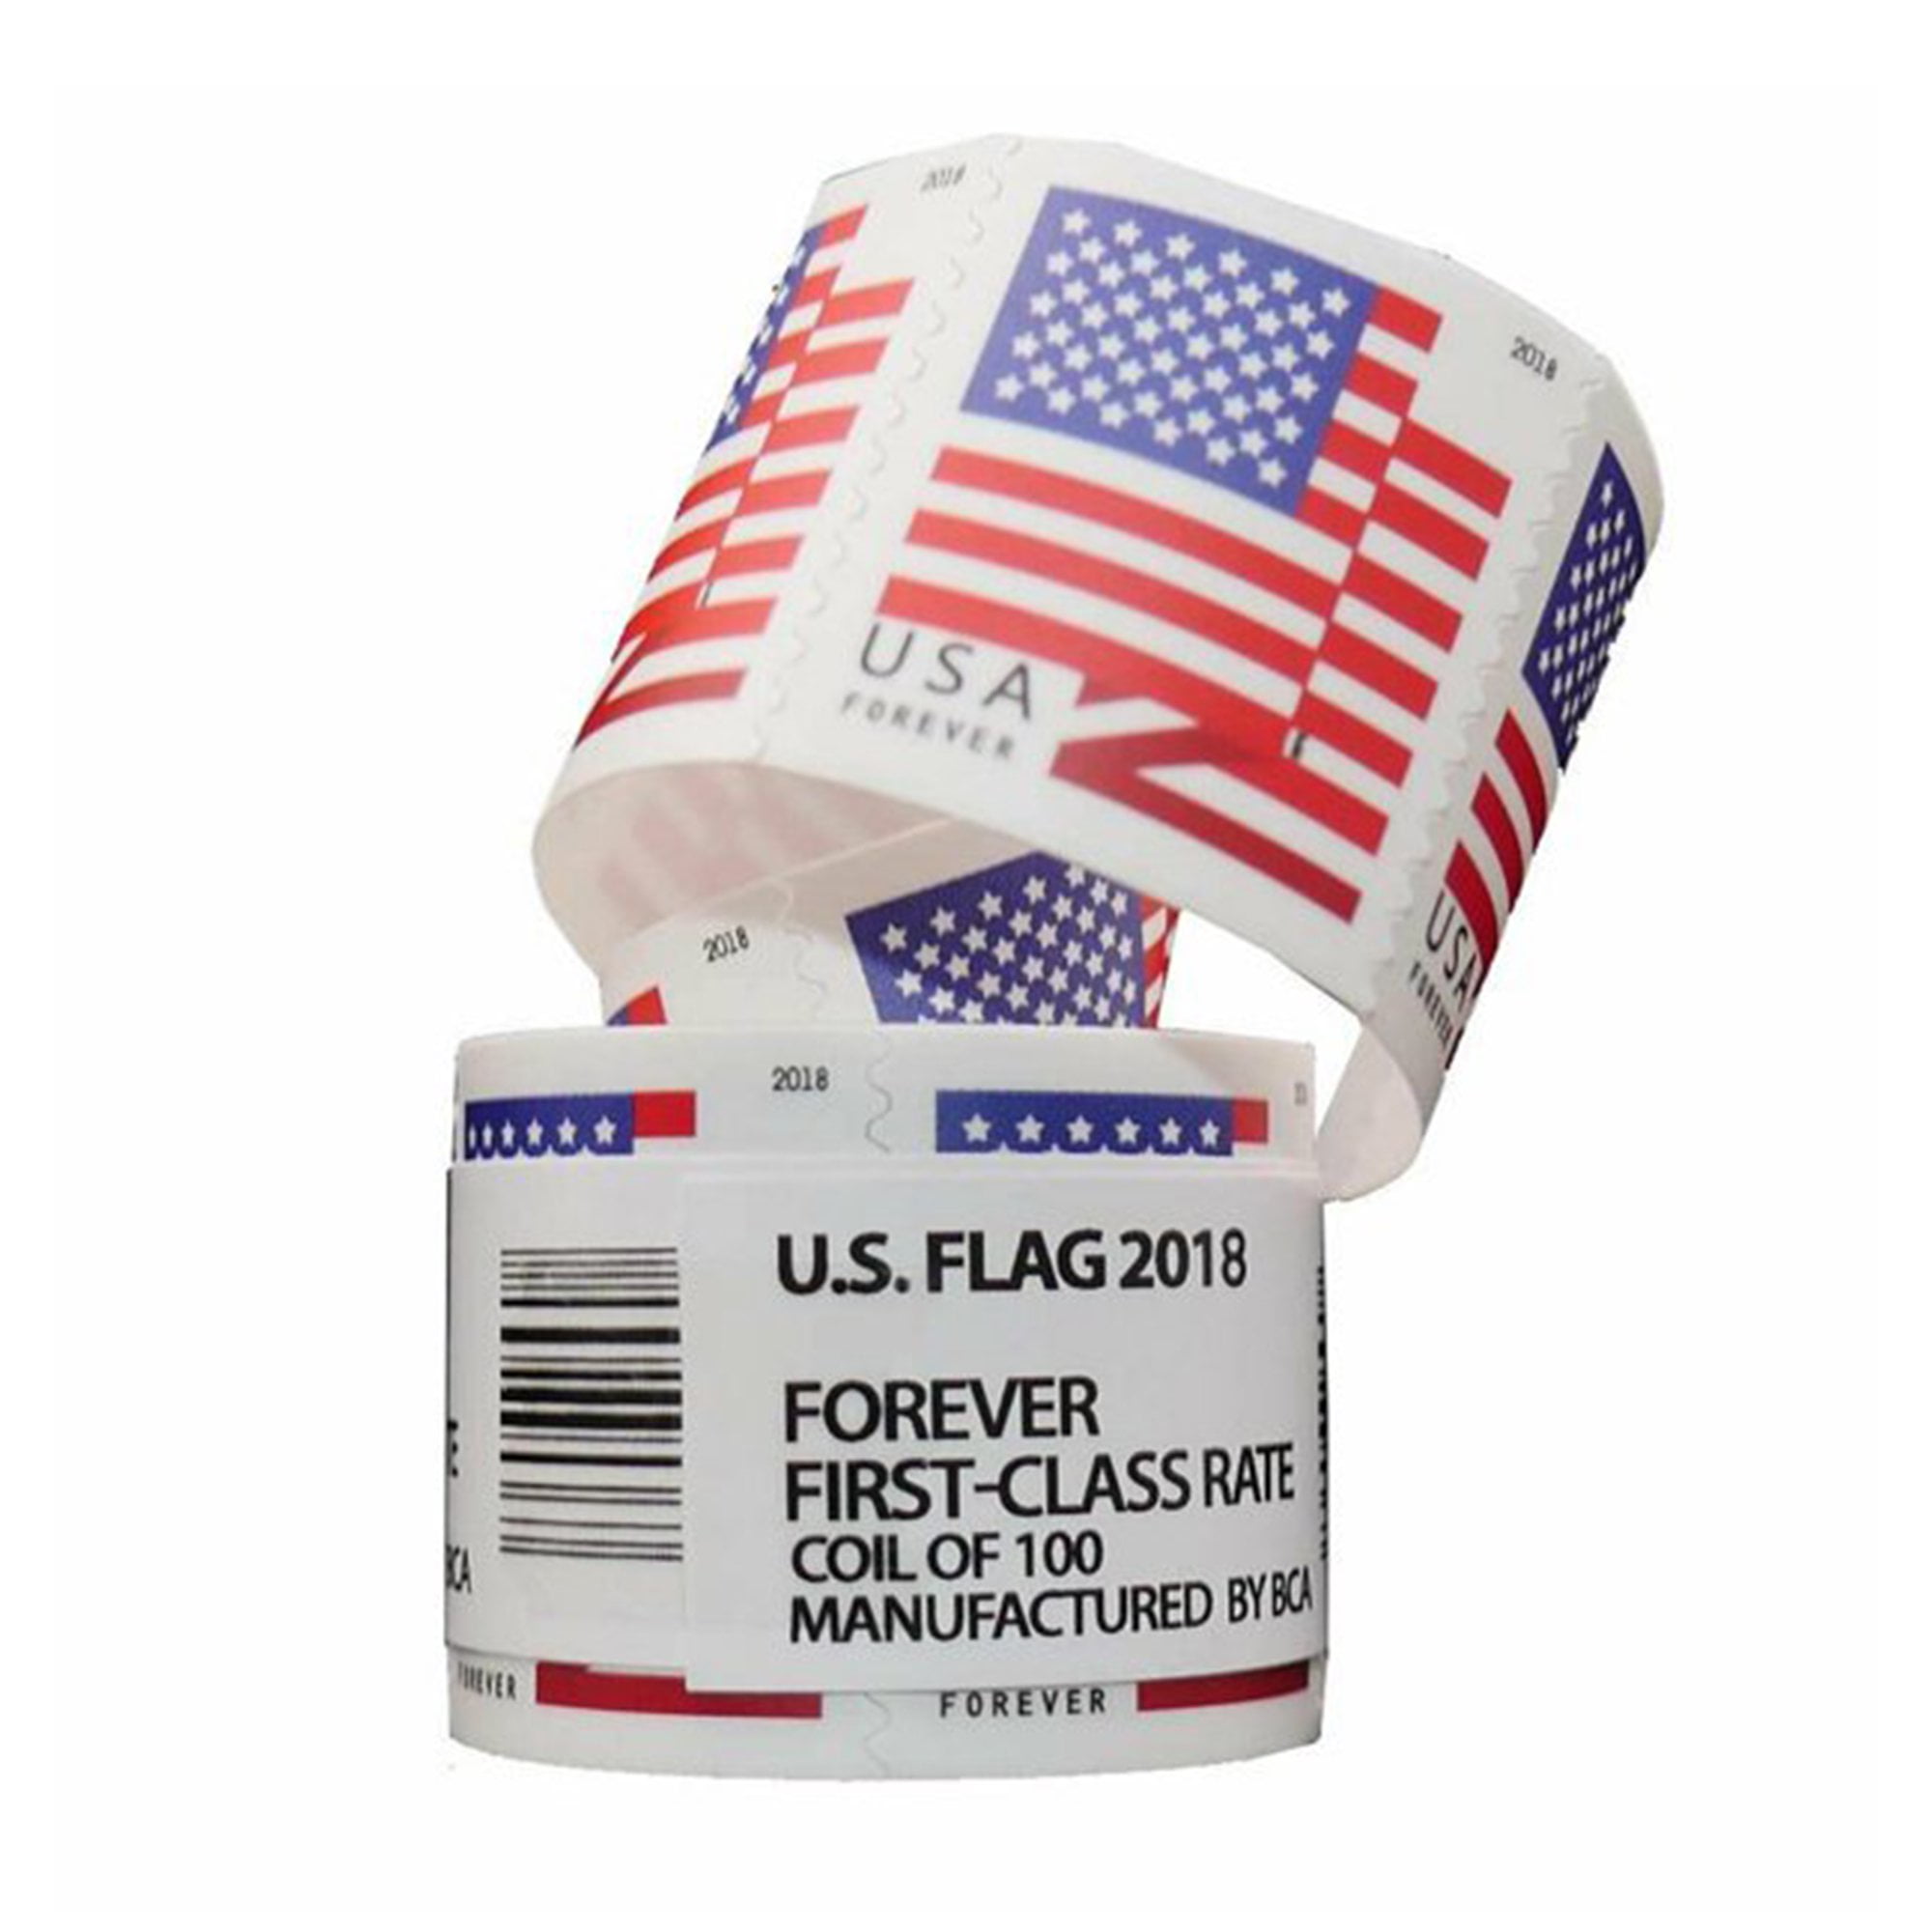 USPS US Flag 2018 Forever Stamps Book of 200 